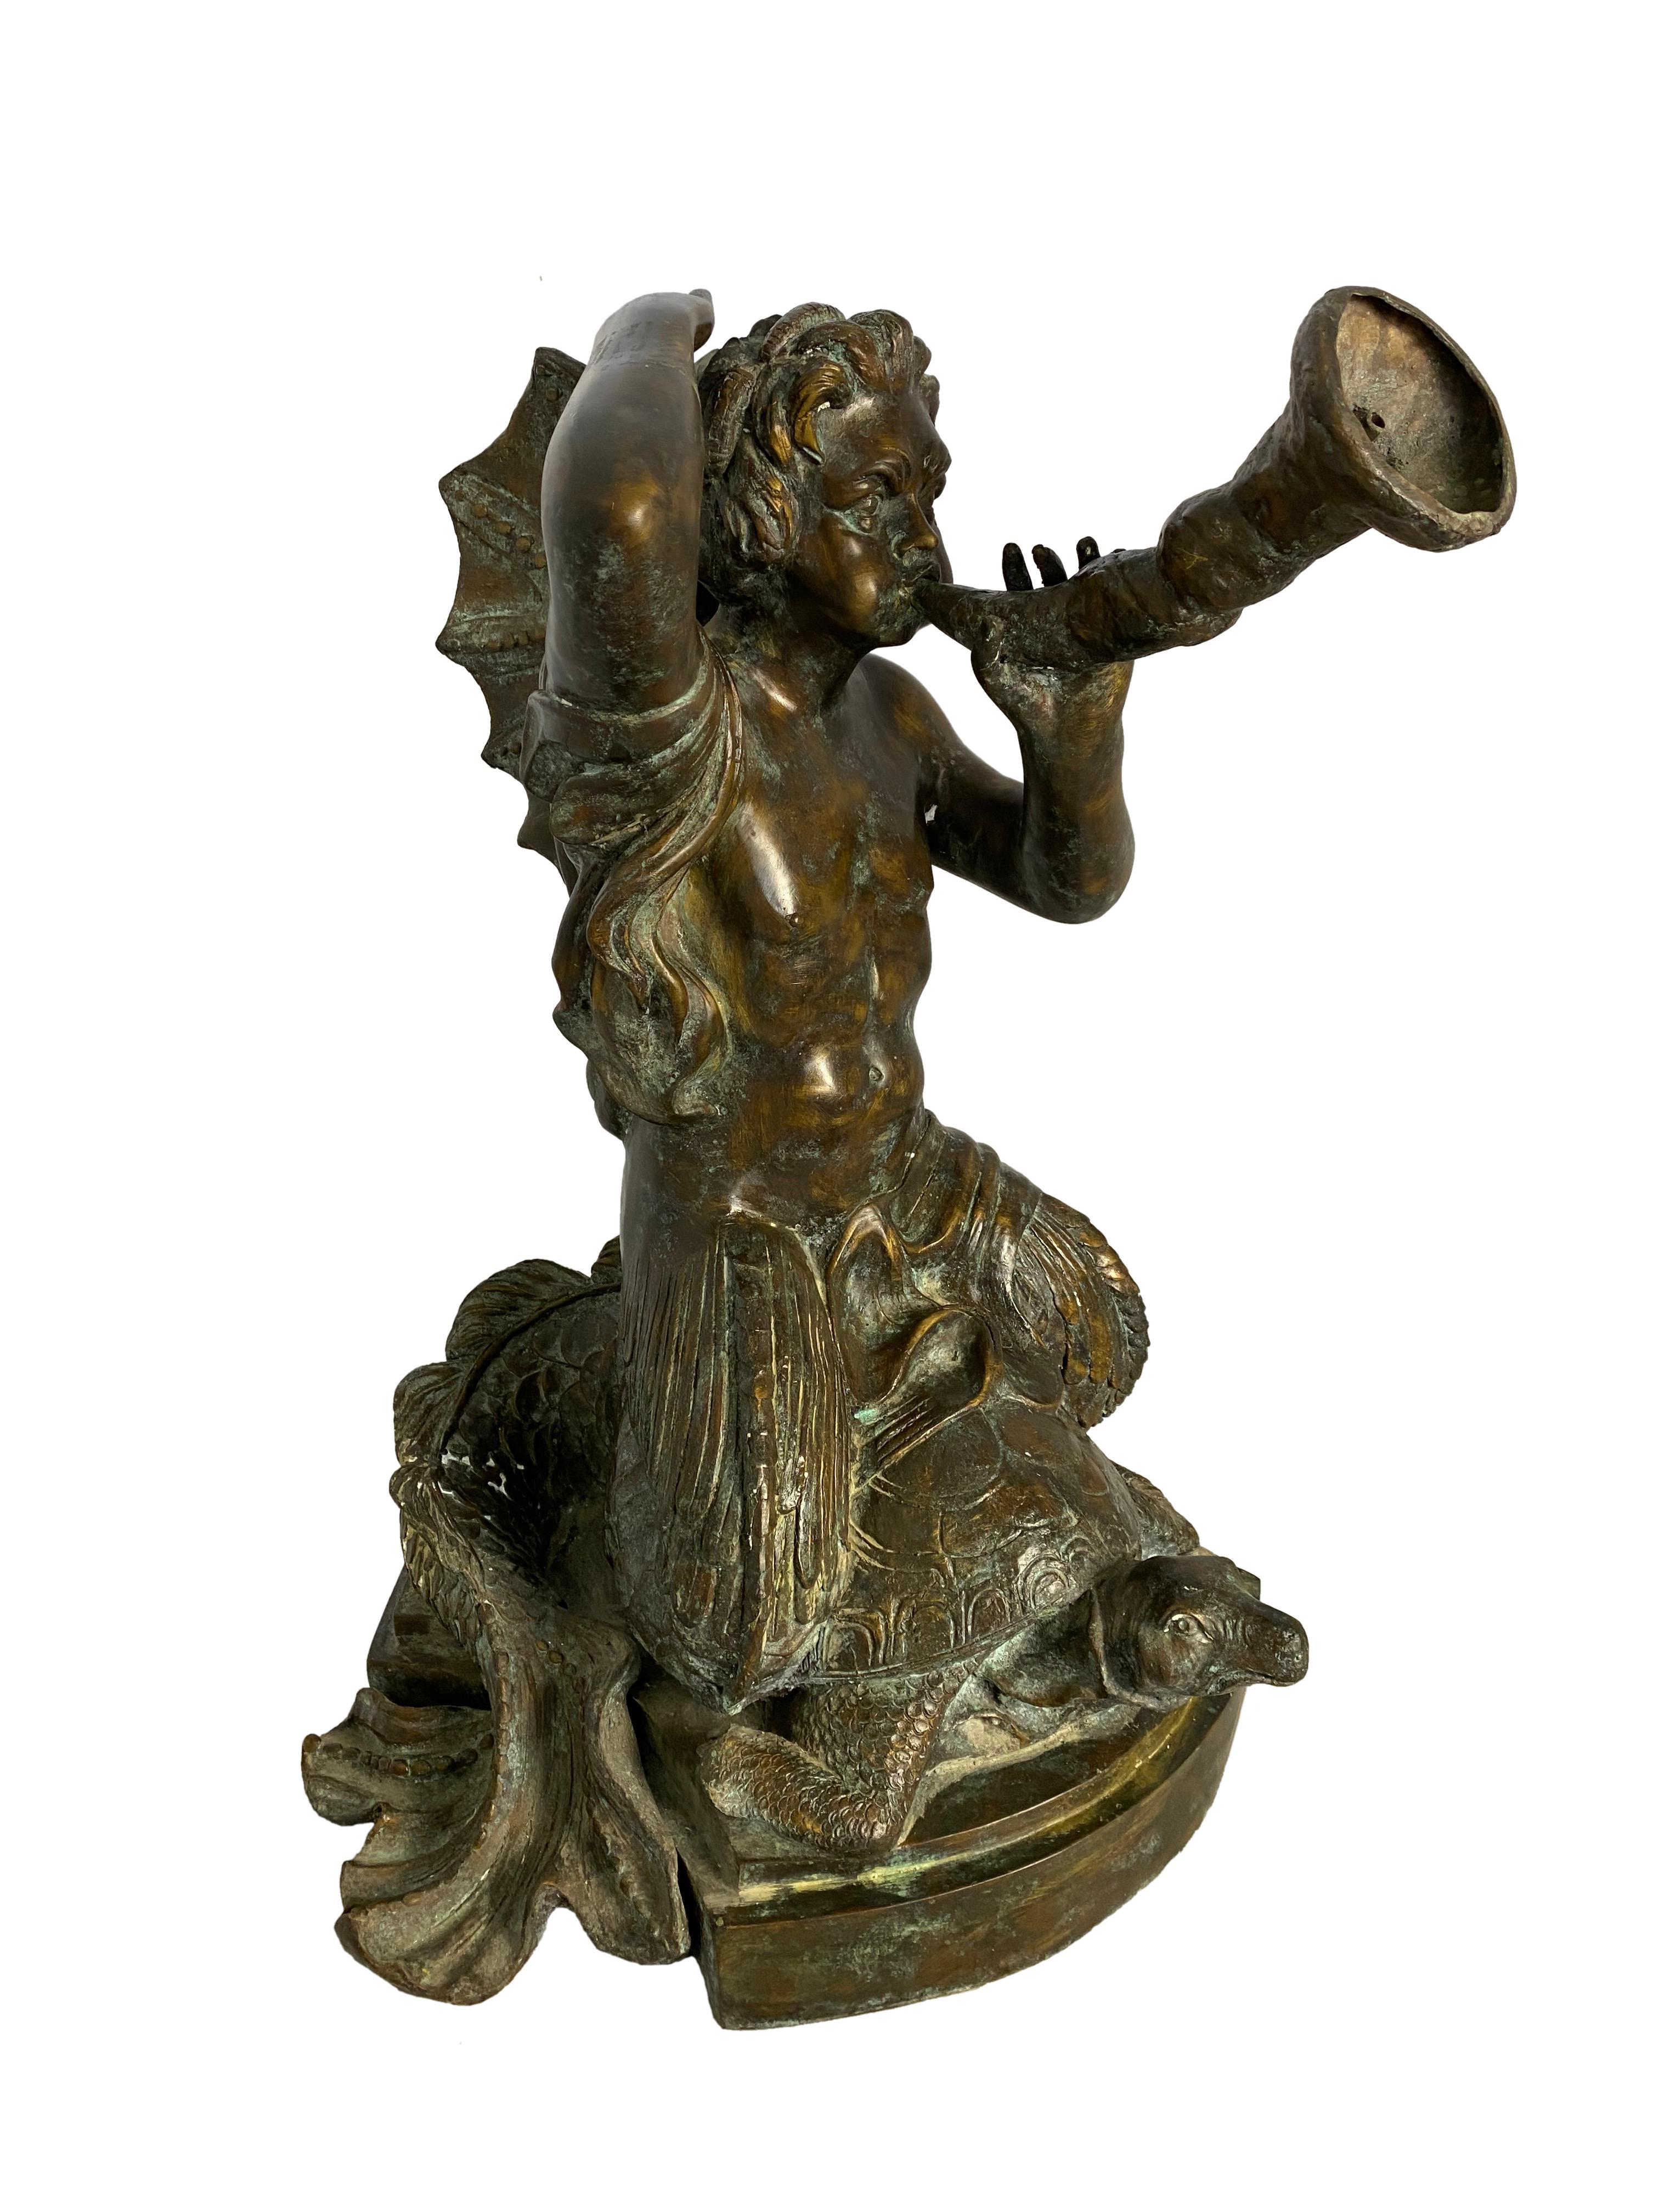 A fantastically detailed bronze mermaid woman seated upon a large tortoise. She appears to be playing a musical instrument, such as a horn, which acts as a fountain and can be viewed in more detail within the images attached. 

Dimensions (cm):
H